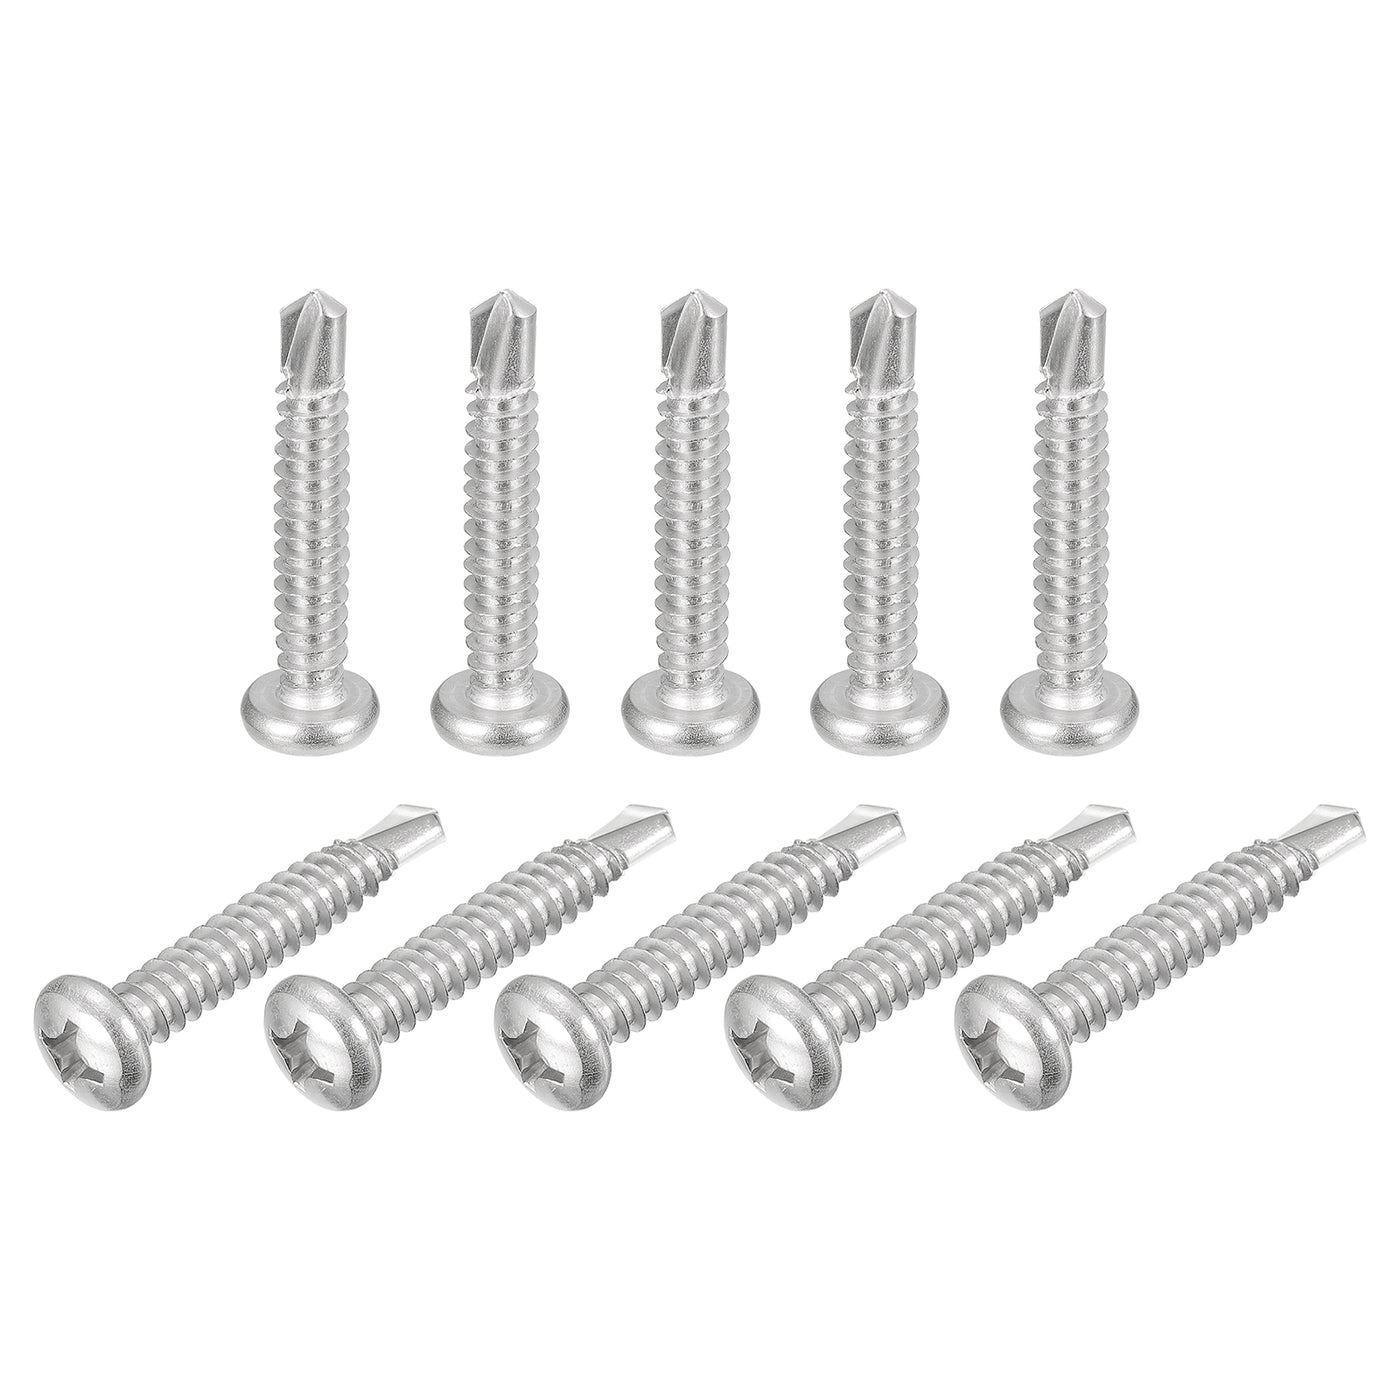 uxcell Uxcell #14 x 1-1/2" Self Drilling Screws, 20pcs Phillips Pan Head Self Tapping Screws